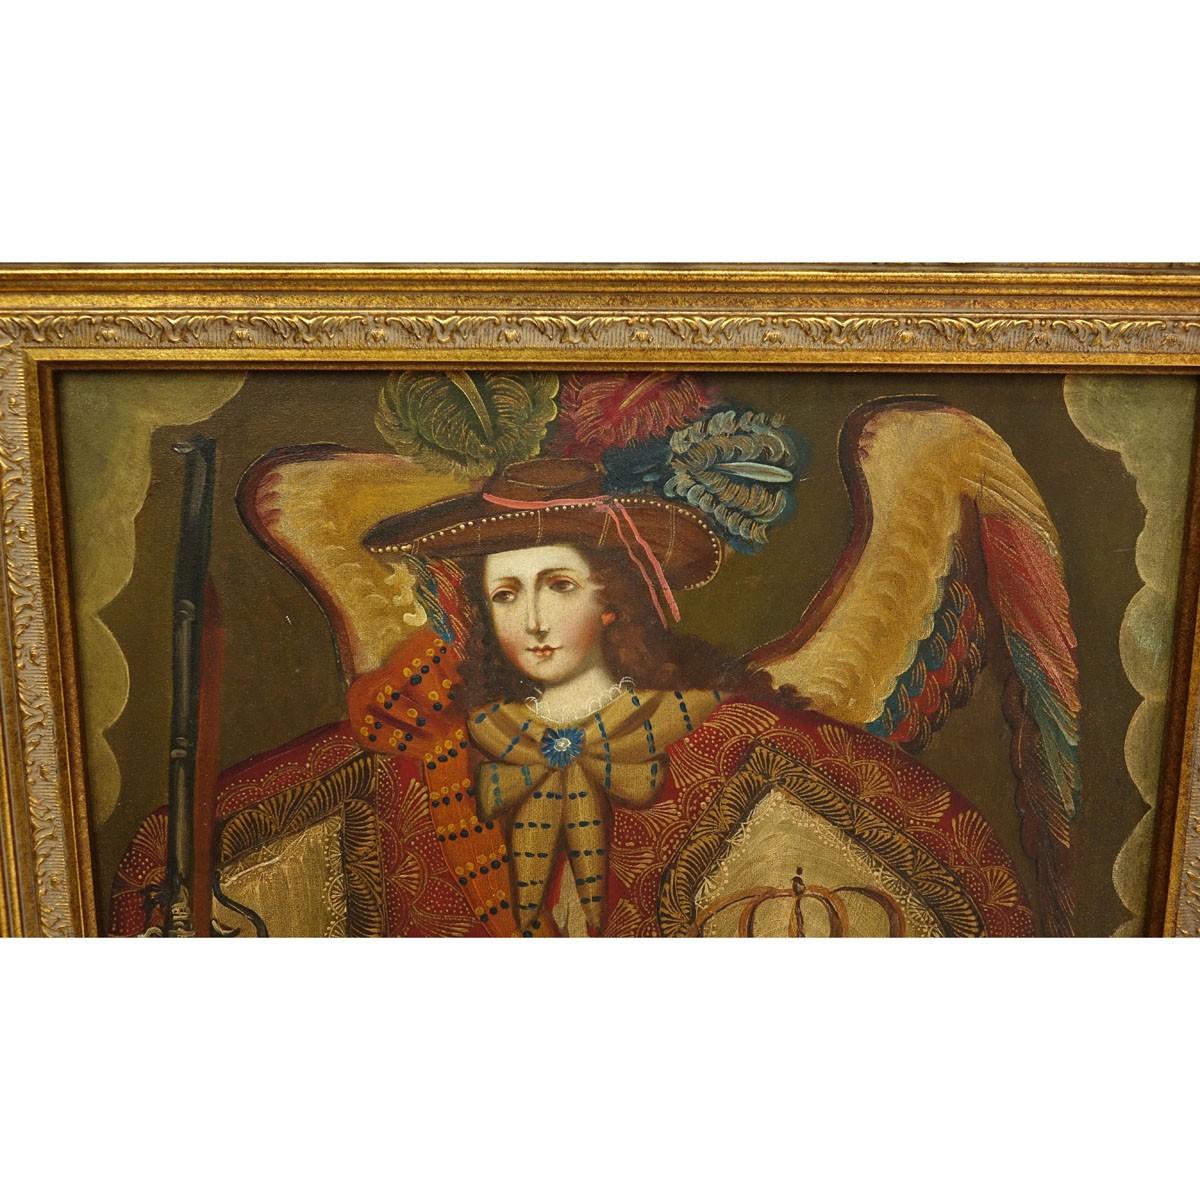 Pair of Cuzco School Oil on Canvas Paintings, Angel with Gun and San Gabriel, One Inscribed Lower Right. Unsigned.